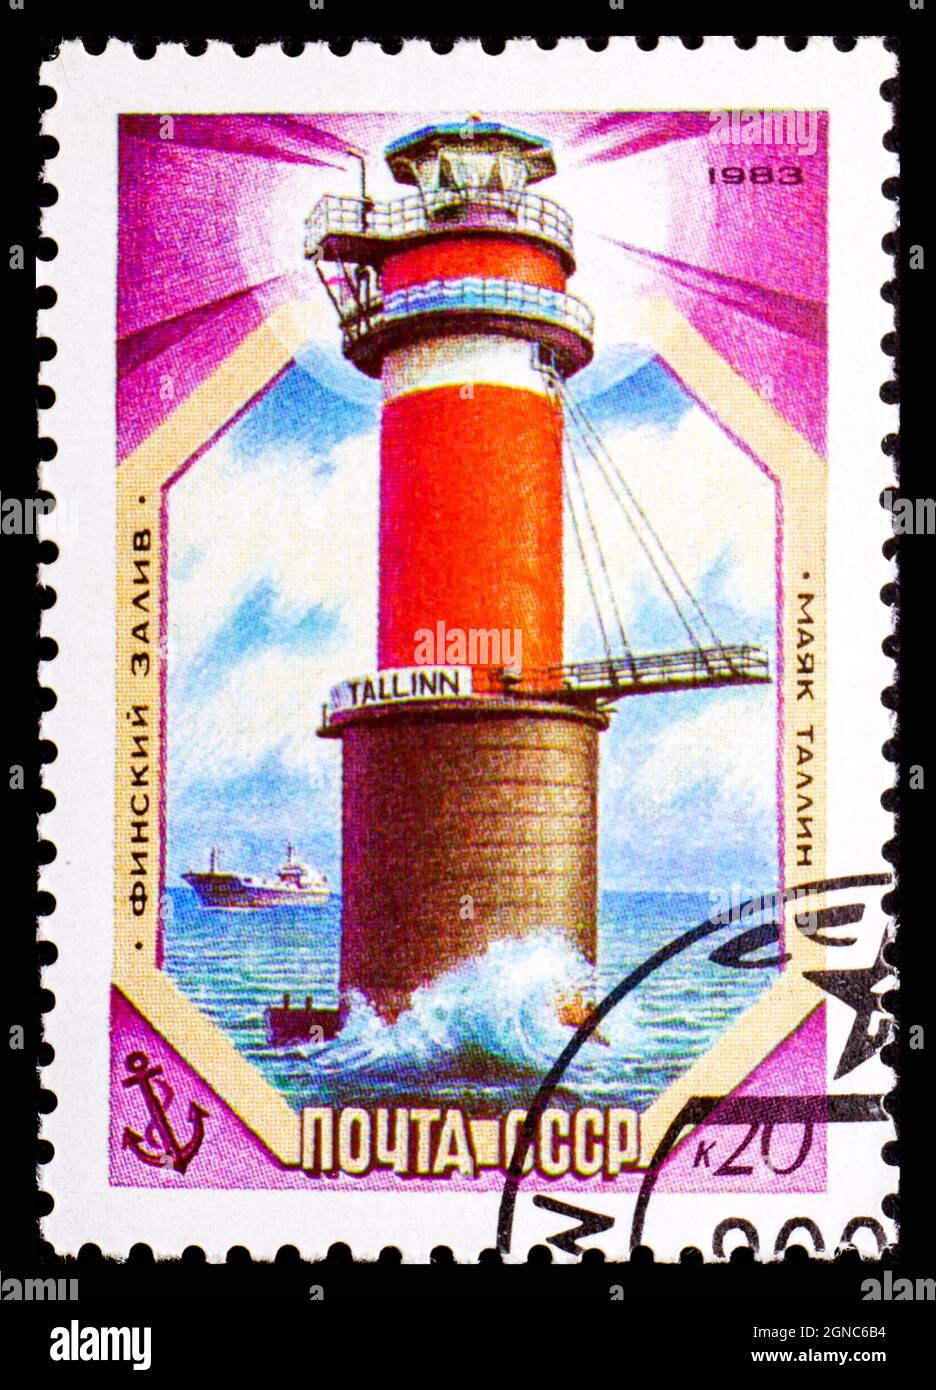 USSR-CIRCA 1983: A stamp printed in the USSR, shows lighthause Tallinn, Gulf of Finland Stock Photo